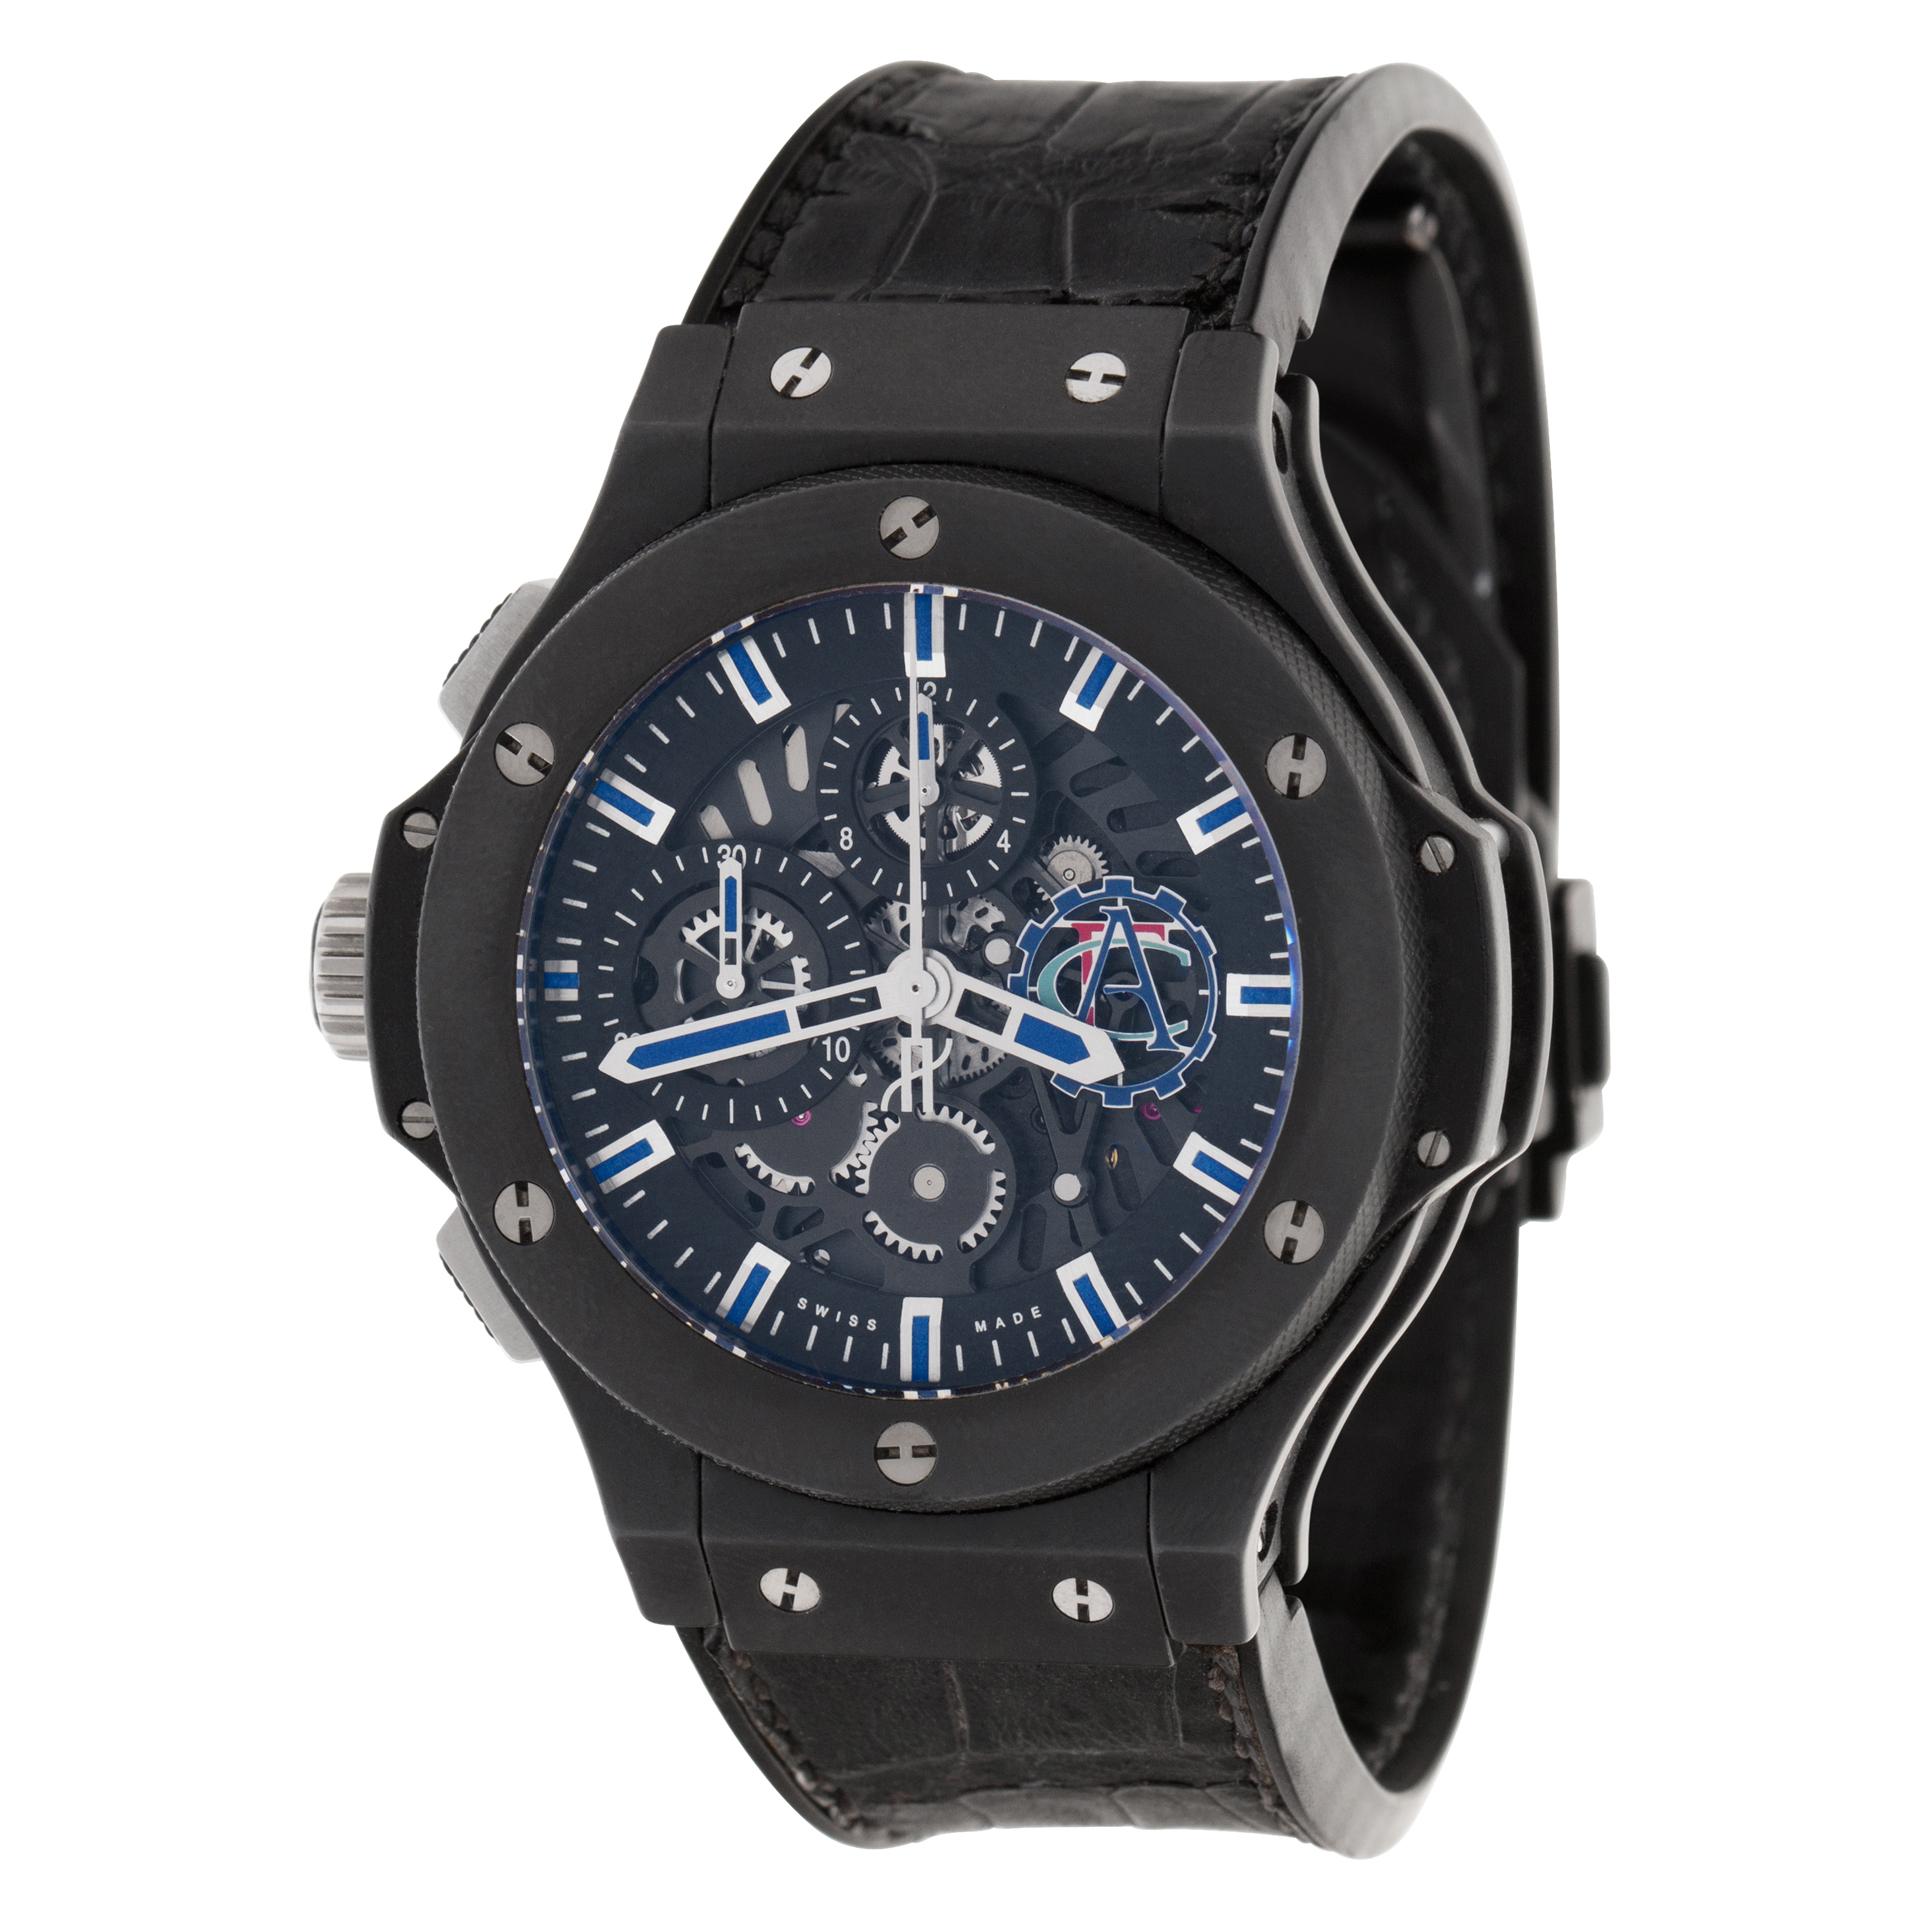 Hublot Aero Bang Drive ACF limited edition in ceramic on a black rubberized alligator band.  Auto w/ chronograph. 44.5 mm case size. Ref 310G.Cl.1170.GR.ACF09. Circa 2010s. Fine Pre-owned Hublot Watch.  Certified preowned Sport Hublot Aero Bang